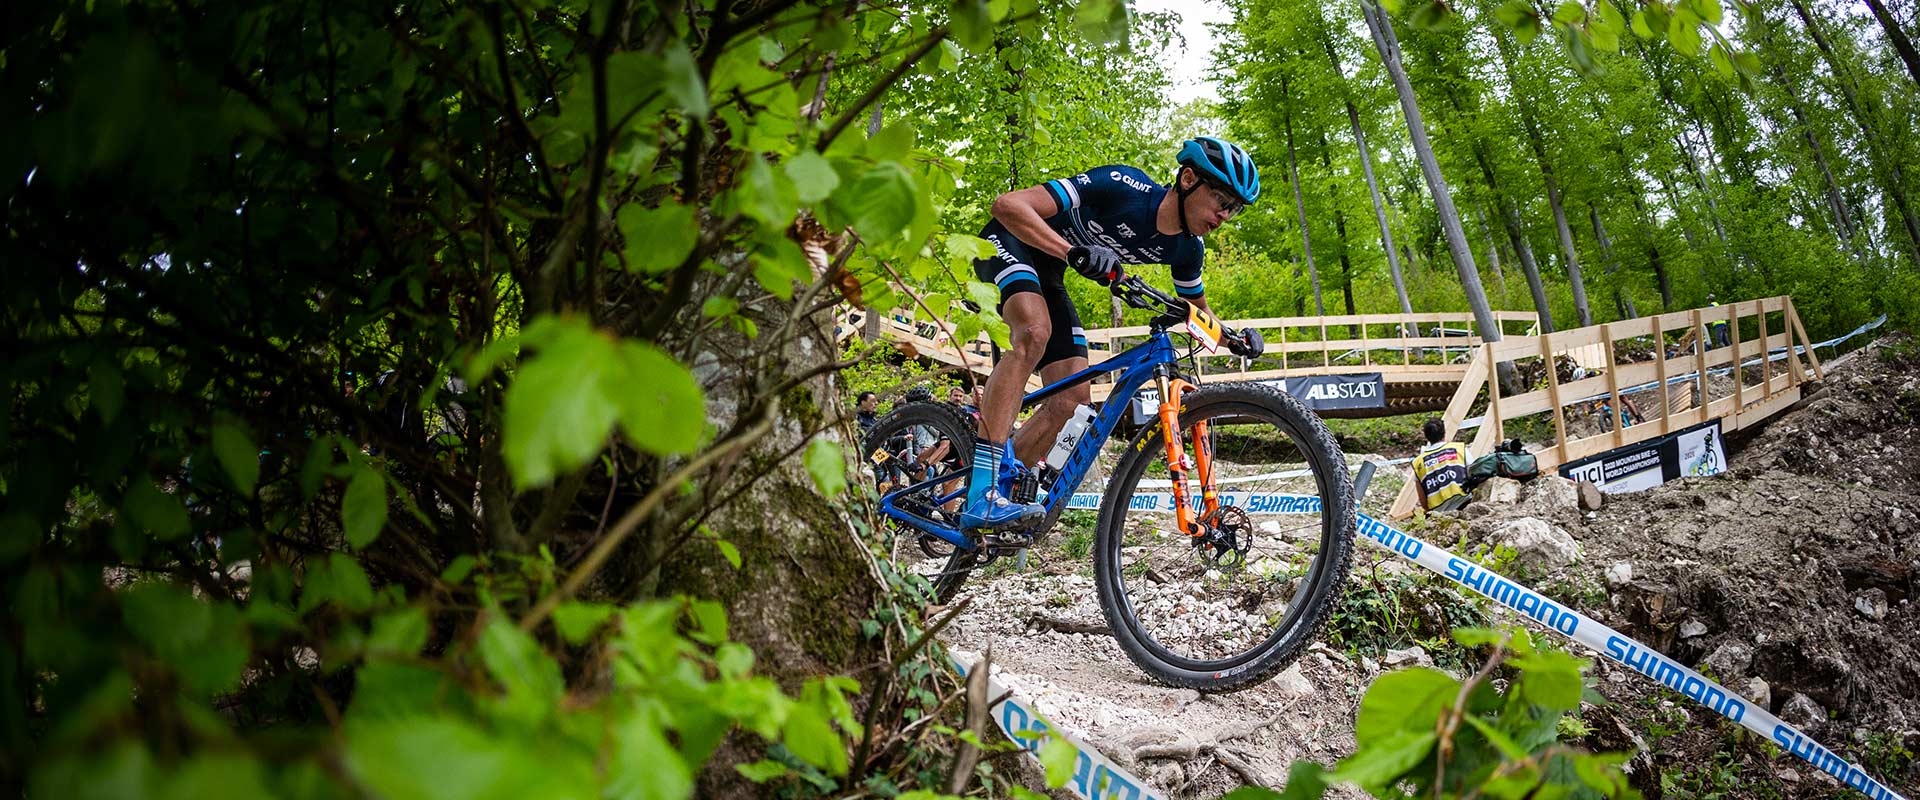 Pure XC Speed Giant Bicycles Official site